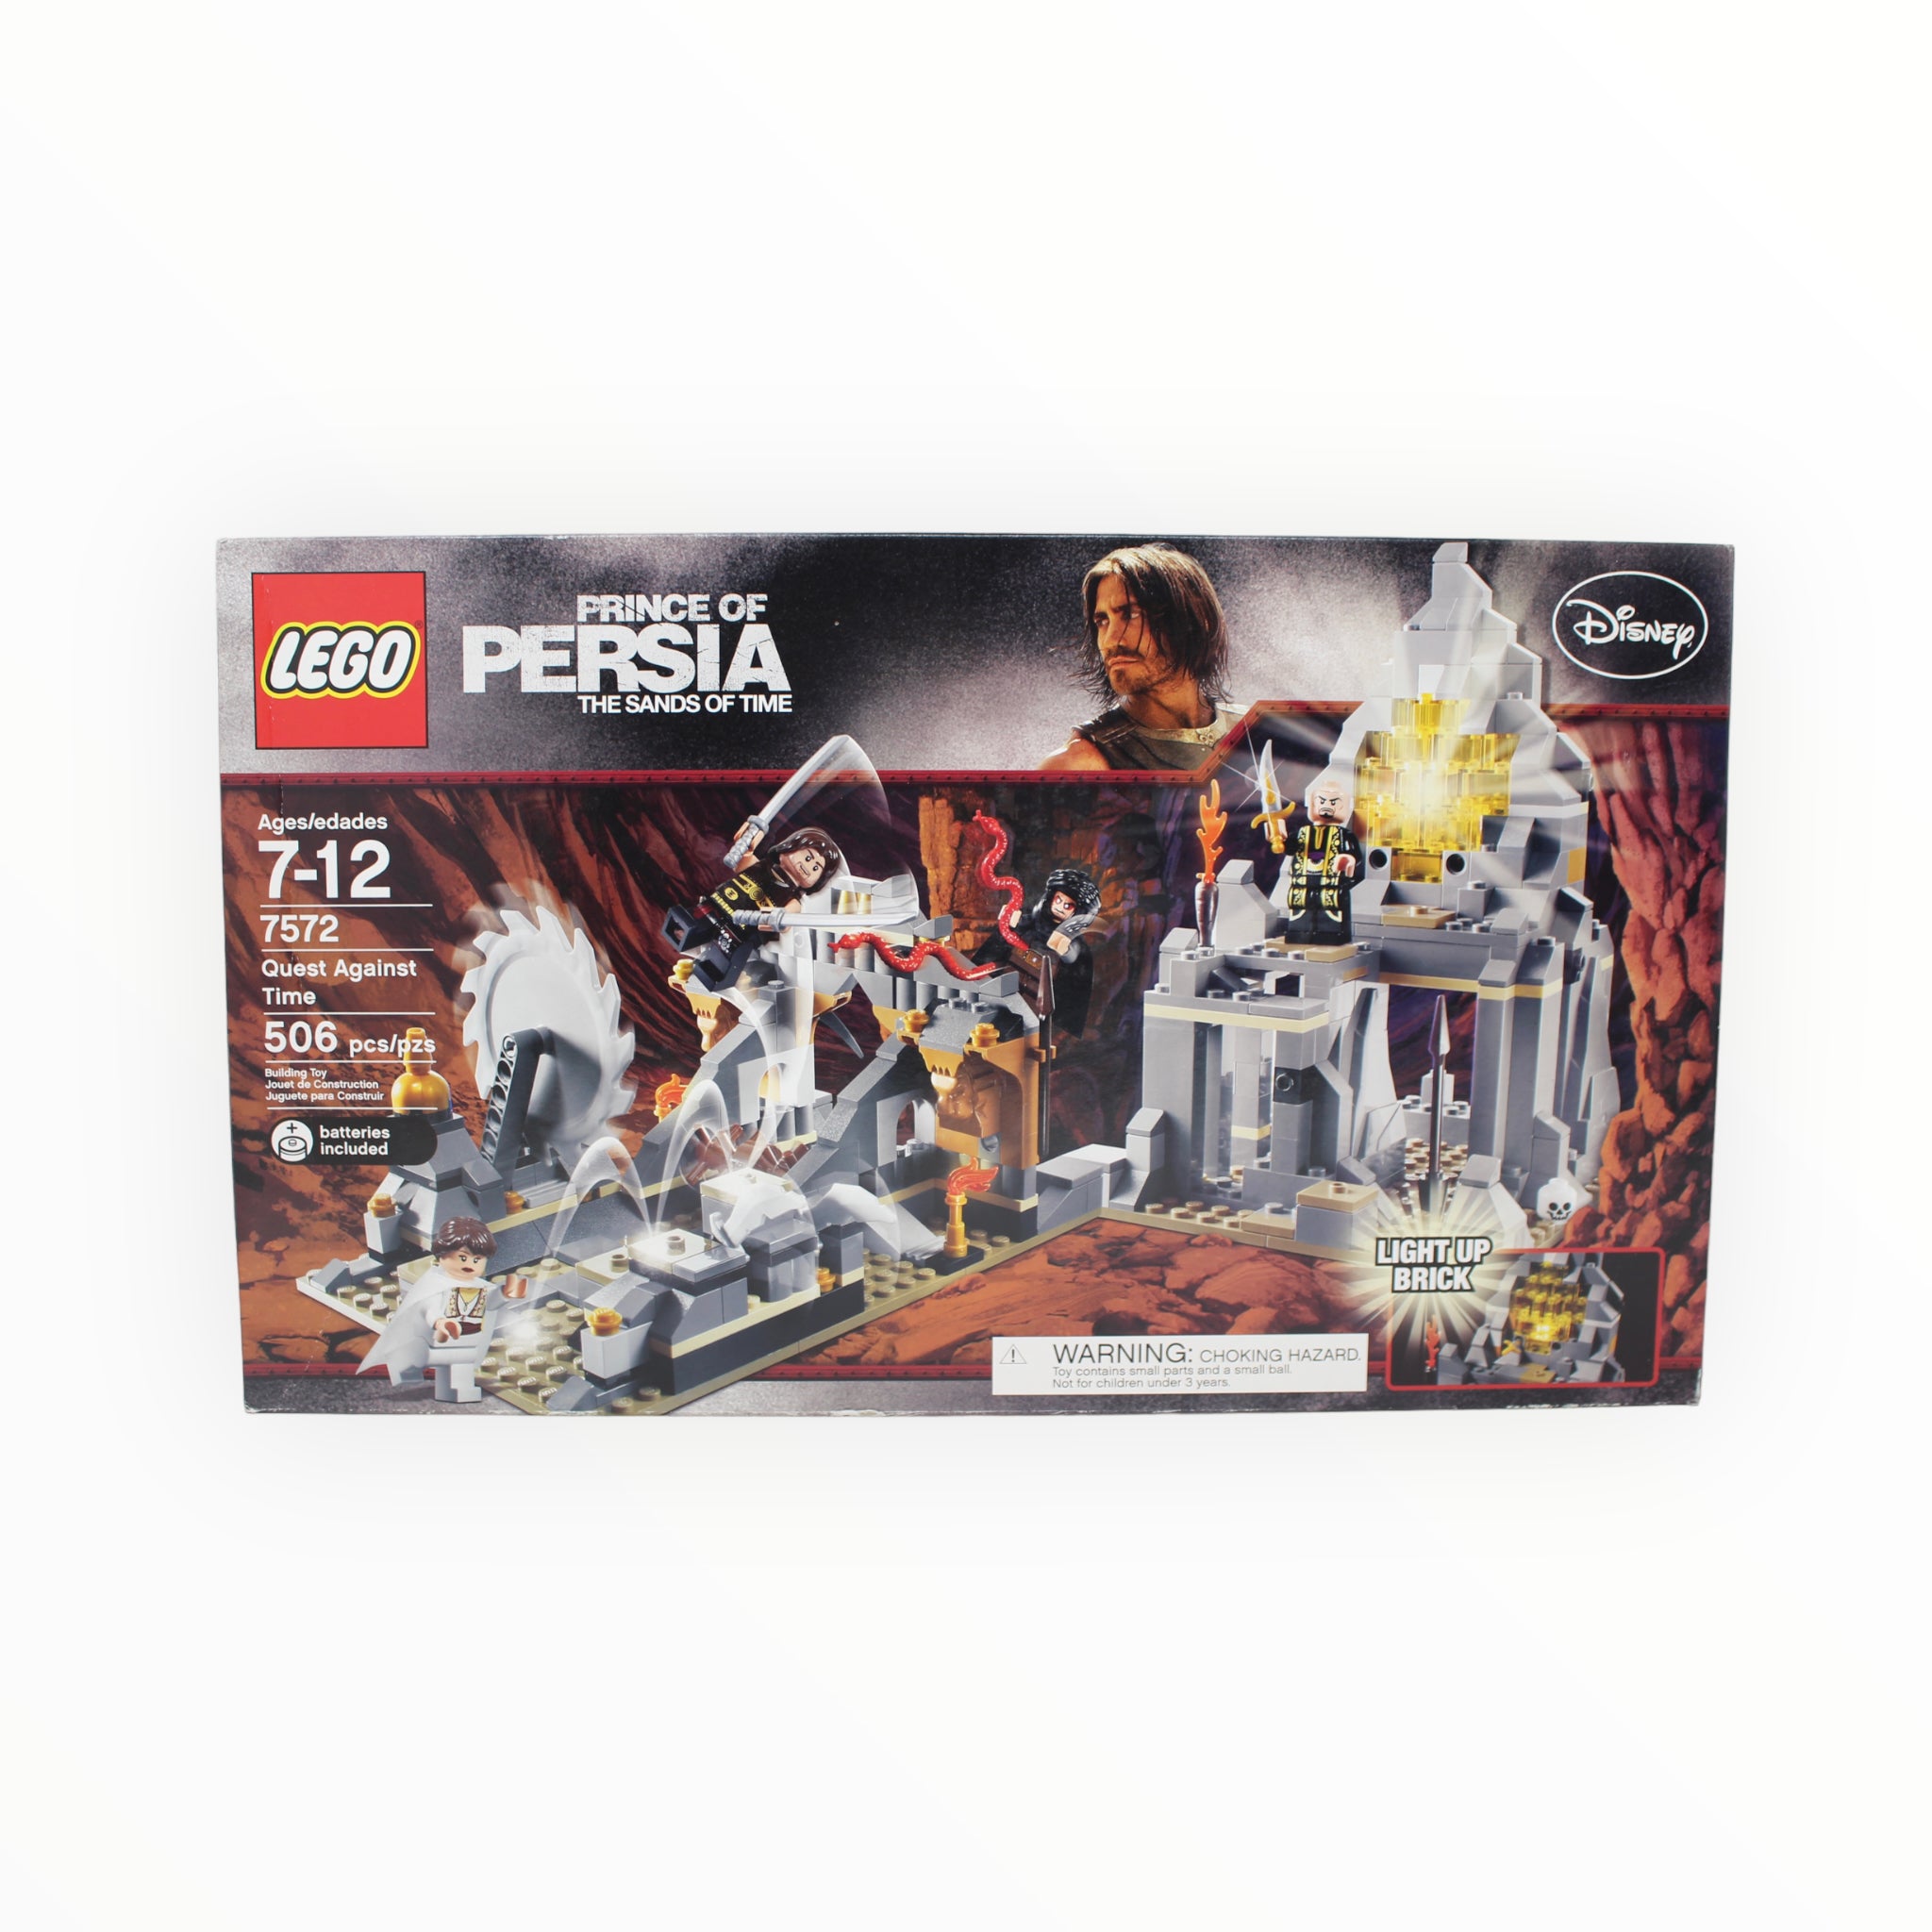 Retired Set 7572 Prince of Persia Quest Against Time